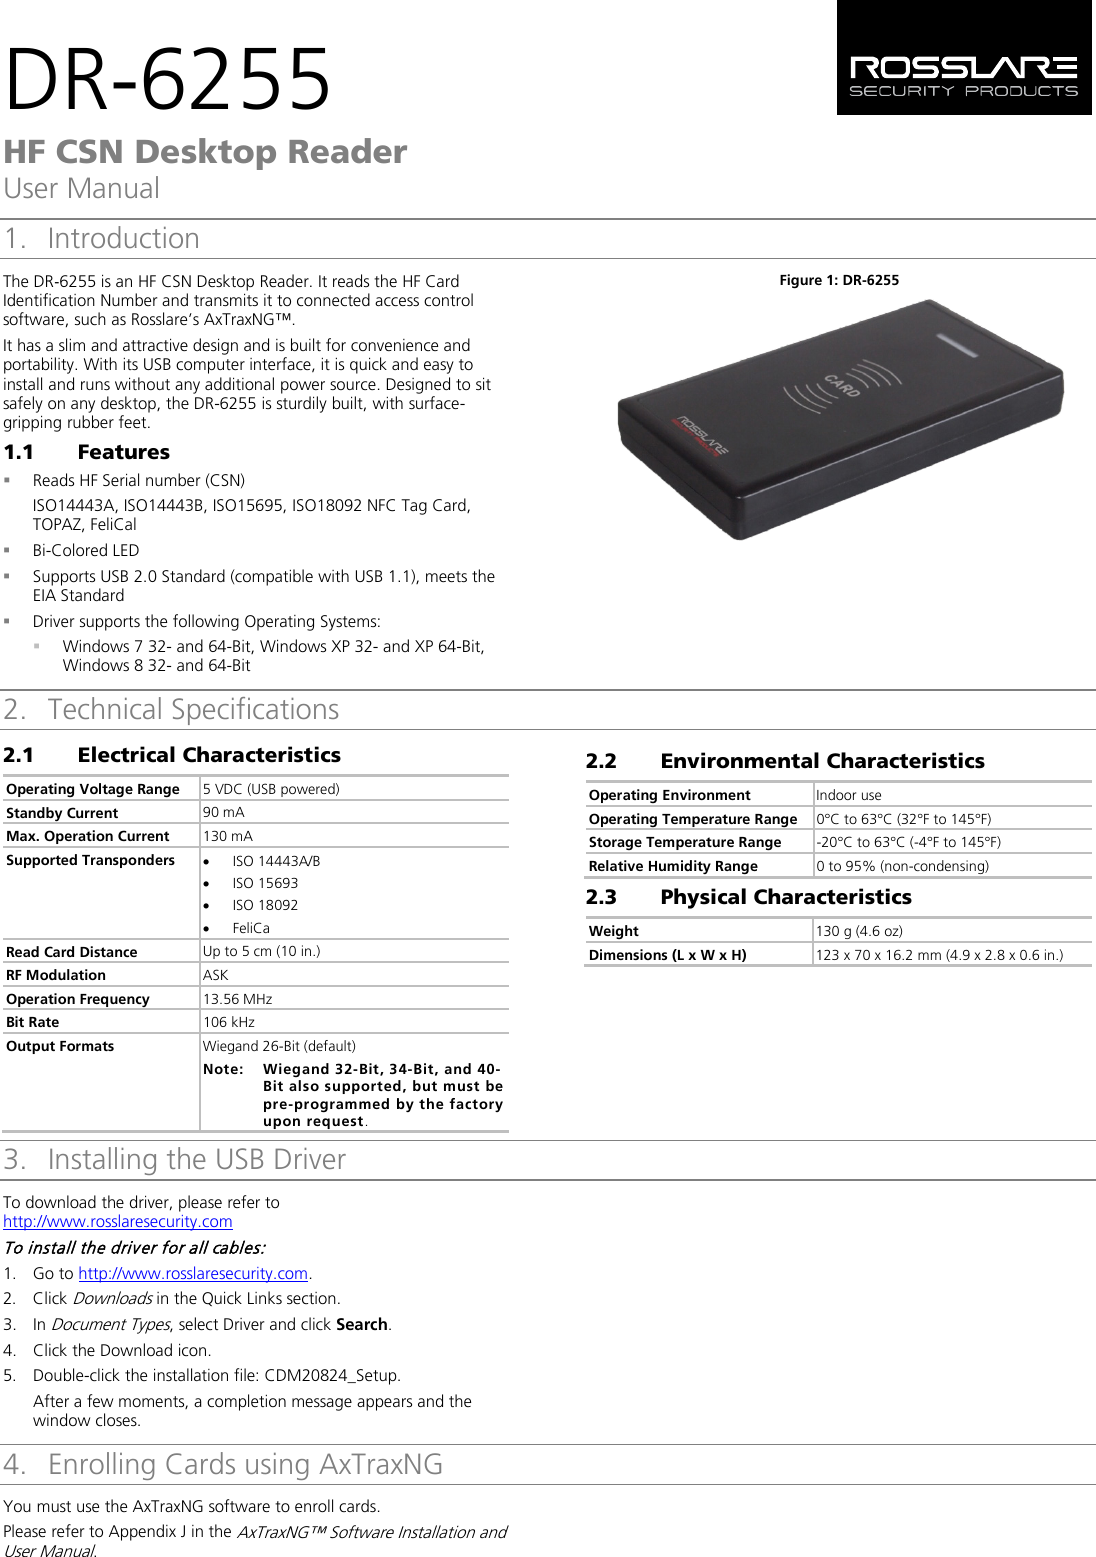 DR-6255 HF CSN Desktop Reader User Manual 1. IntroductionThe DR‐6255 is an HF CSN Desktop Reader. It reads the HF Card Identification Number and transmits it to connected access control software, such as Rosslare’s AxTraxNG™. It has a slim and attractive design and is built for convenience and portability. With its USB computer interface, it is quick and easy to install and runs without any additional power source. Designed to sit safely on any desktop, the DR-6255 is sturdily built, with surface-gripping rubber feet. 1.1 Features Reads HF Serial number (CSN)ISO14443A, ISO14443B, ISO15695, ISO18092 NFC Tag Card,TOPAZ, FeliCalBi-Colored LEDSupports USB 2.0 Standard (compatible with USB 1.1), meets theEIA StandardDriver supports the following Operating Systems:Windows 7 32- and 64-Bit, Windows XP 32- and XP 64-Bit,Windows 8 32- and 64-BitFigure 1: DR-6255 2. Technical Specifications2.1 Electrical Characteristics Operating Voltage Range 5 VDC (USB powered) Standby Current 90 mA Max. Operation Current 130 mA Supported Transponders •ISO 14443A/B •ISO 15693•ISO 18092•FeliCaRead Card Distance Up to 5 cm (10 in.) RF Modulation ASK Operation Frequency 13.56 MHz Bit Rate  106 kHz Output Formats  Wiegand 26-Bit (default) Note: Wiegand 32-Bit, 34-Bit, and 40-Bit also supported, but must be pre-programmed by the factory upon request. 2.2 6BEnvironmental Characteristics Operating Environment Indoor use Operating Temperature Range 0°C to 63°C (32°F to 145°F) Storage Temperature Range -20°C to 63°C (-4°F to 145°F) Relative Humidity Range 0 to 95% (non-condensing) 2.3 7BPhysical Characteristics Weight 130 g (4.6 oz) Dimensions (L x W x H) 123 x 70 x 16.2 mm (4.9 x 2.8 x 0.6 in.) 3. 2BInstalling the USB Driver To download the driver, please refer to http://www.rosslaresecurity.com To install the driver for all cables: 1. Go to http://www.rosslaresecurity.com.2. Click Downloads in the Quick Links section.3. In Document Types, select Driver and click Search.4. Click the Download icon.5. Double-click the installation file: CDM20824_Setup.After a few moments, a completion message appears and thewindow closes.4. 3BEnrolling Cards using AxTraxNGYou must use the AxTraxNG software to enroll cards. Please refer to Appendix J in the AxTraxNG™ Software Installation and User Manual. 